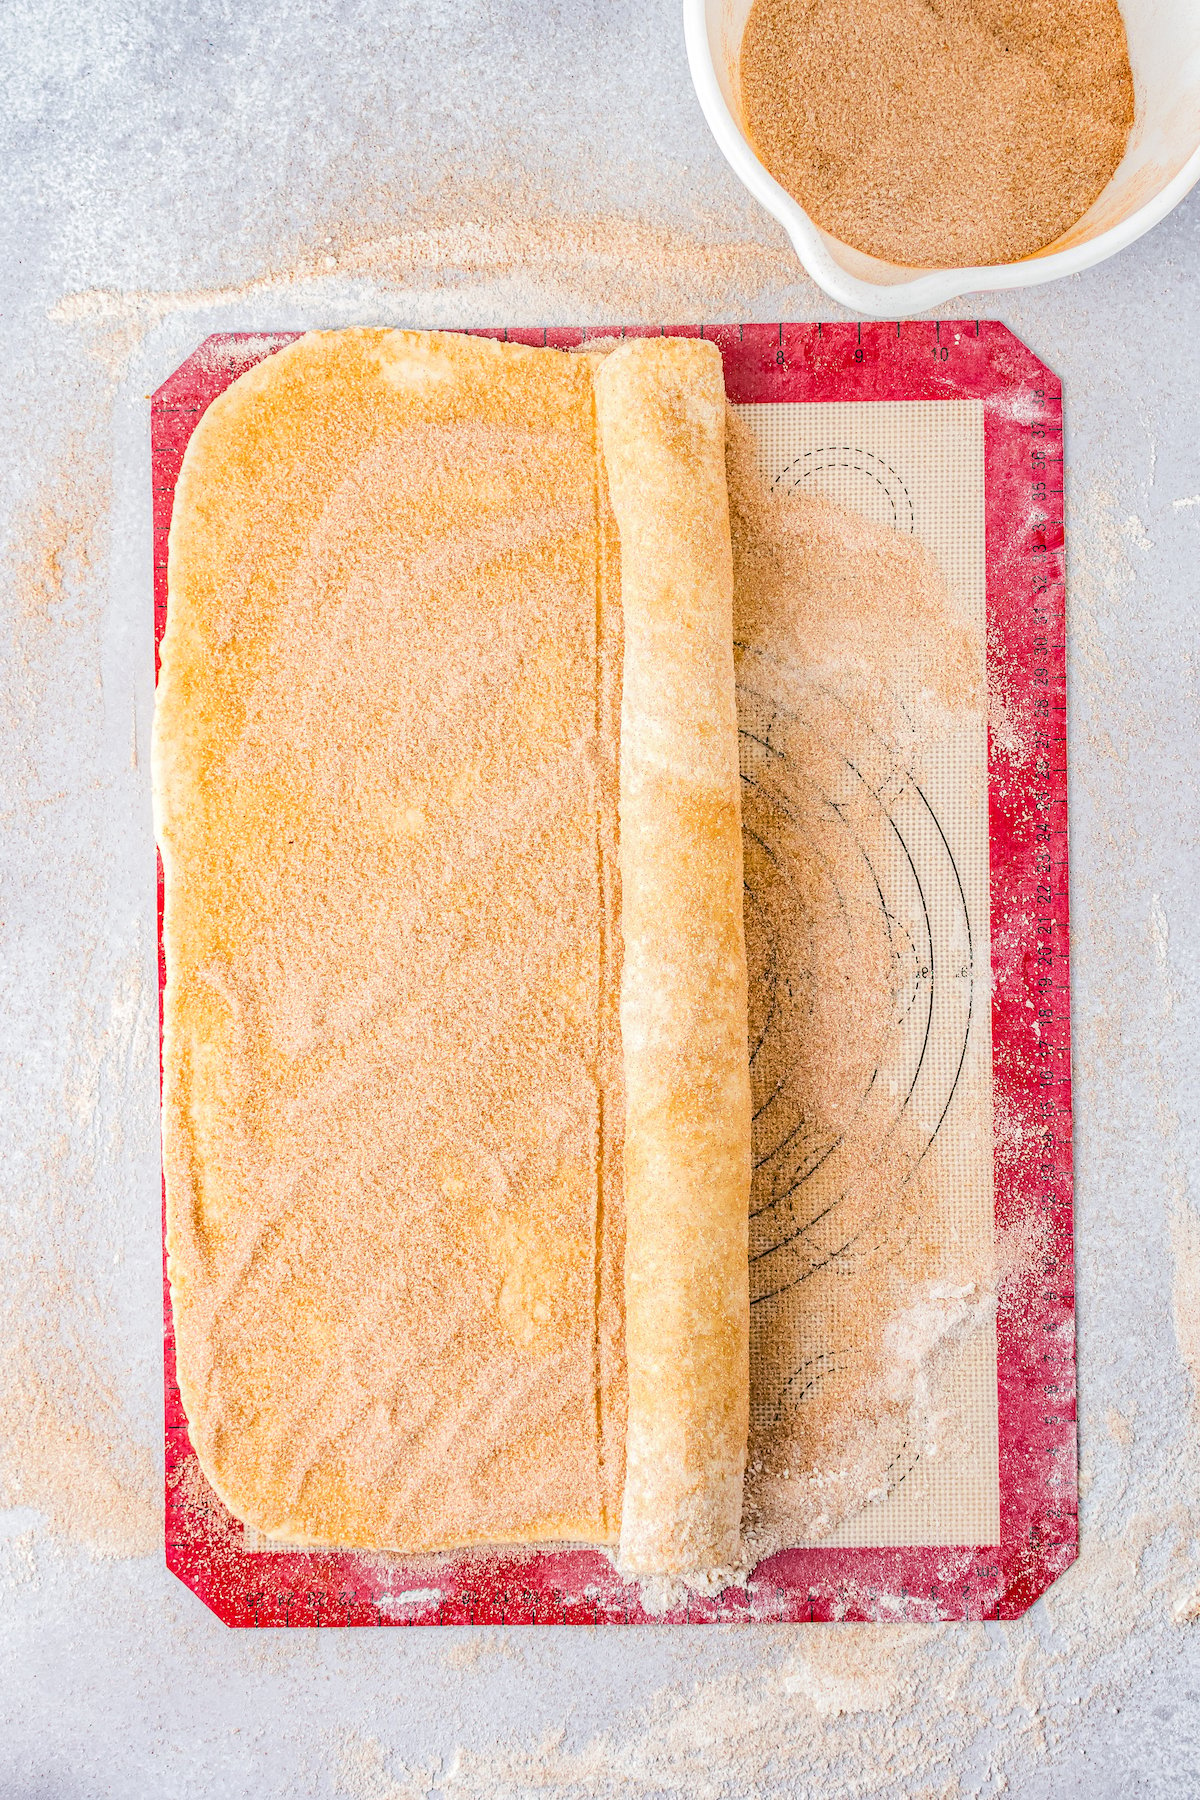 a large sheet of dough covered in cinnamon sugar being rolled up lengthwise